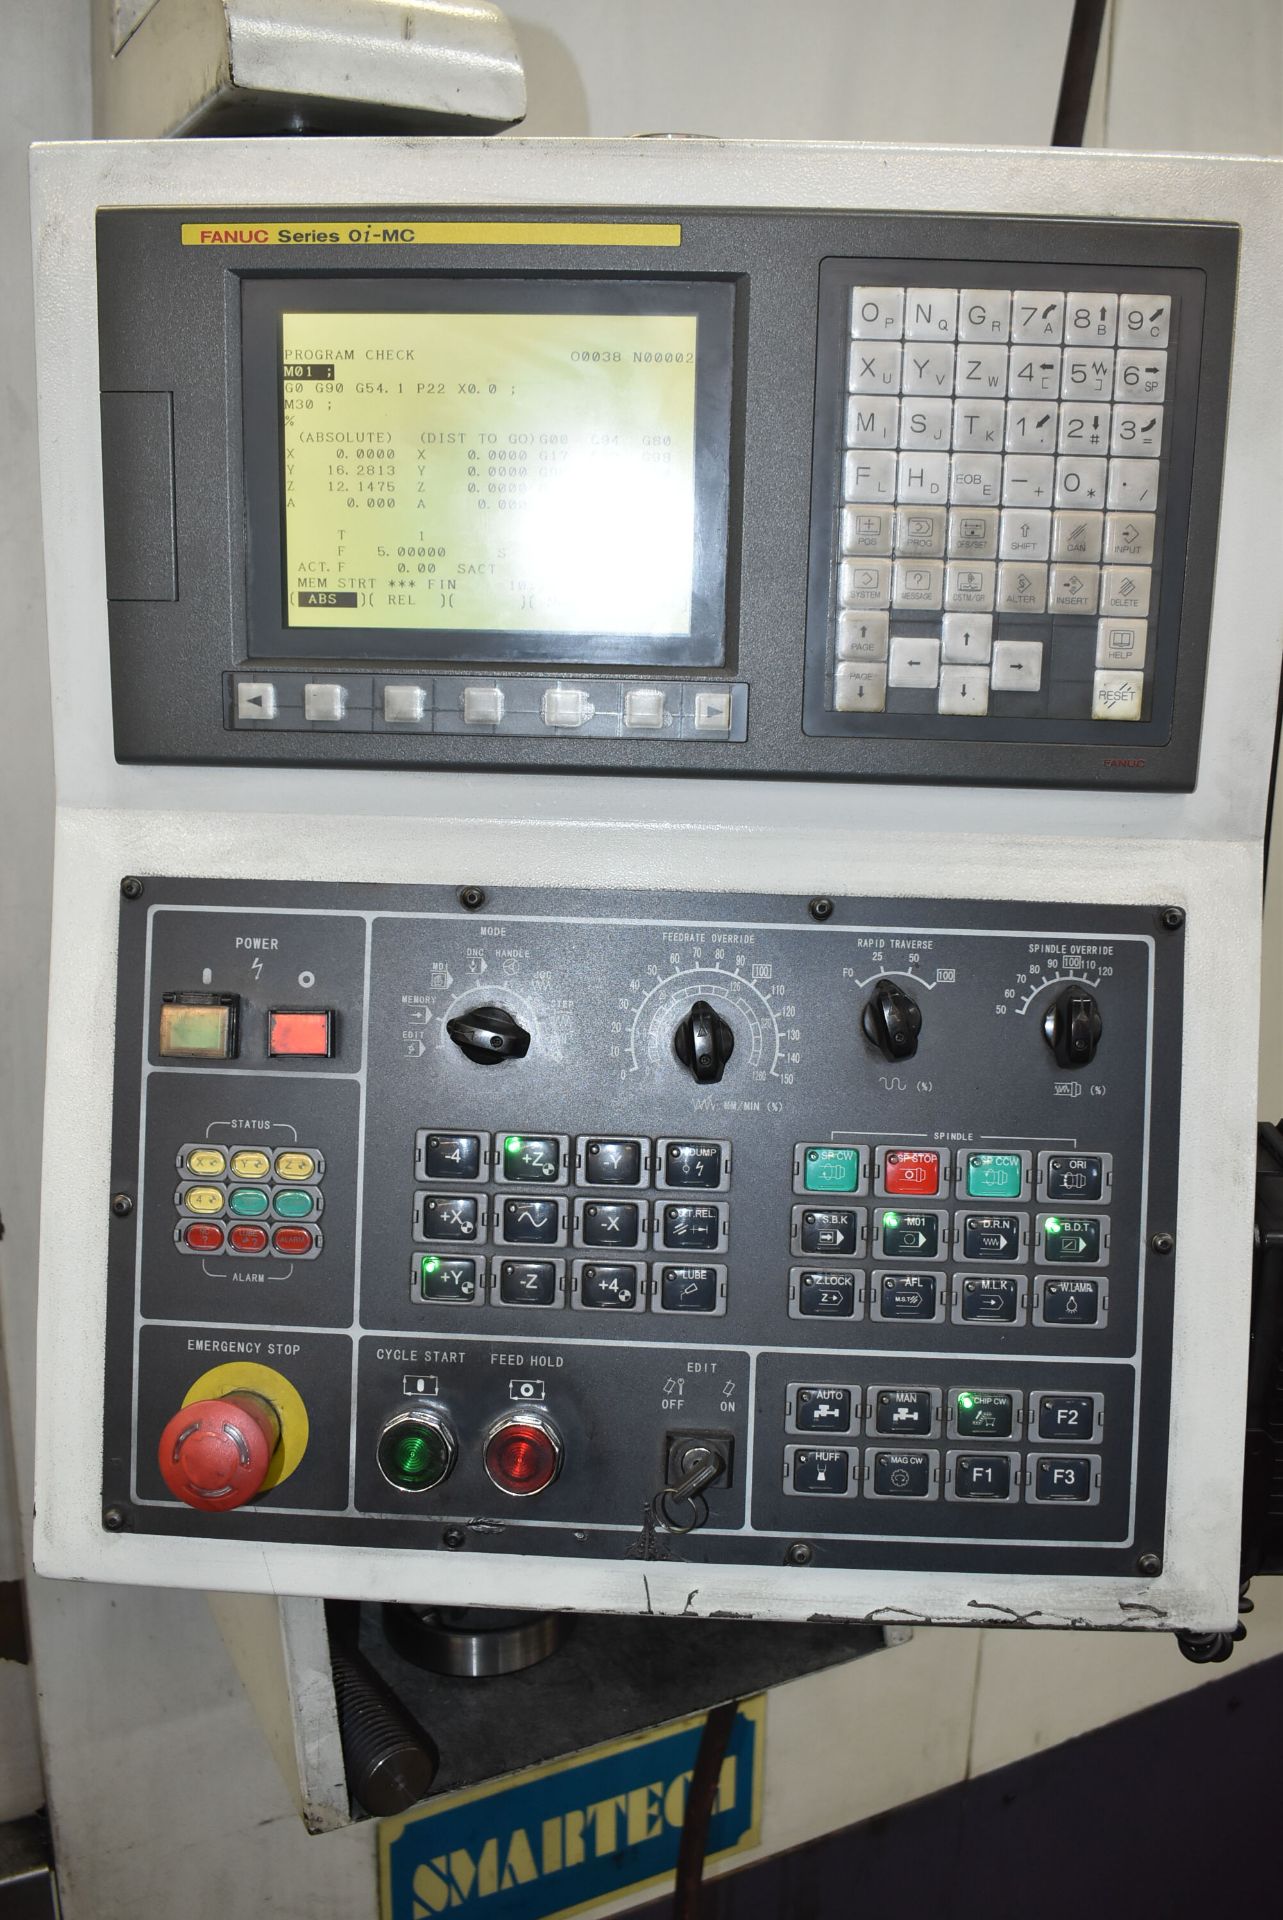 TOP TECH CNC 1580 4-AXIS CNC VERTICAL MACHINING CENTER WITH FANUC SERIES OI-MC CNC CONTROL, 31.5" - Image 3 of 6